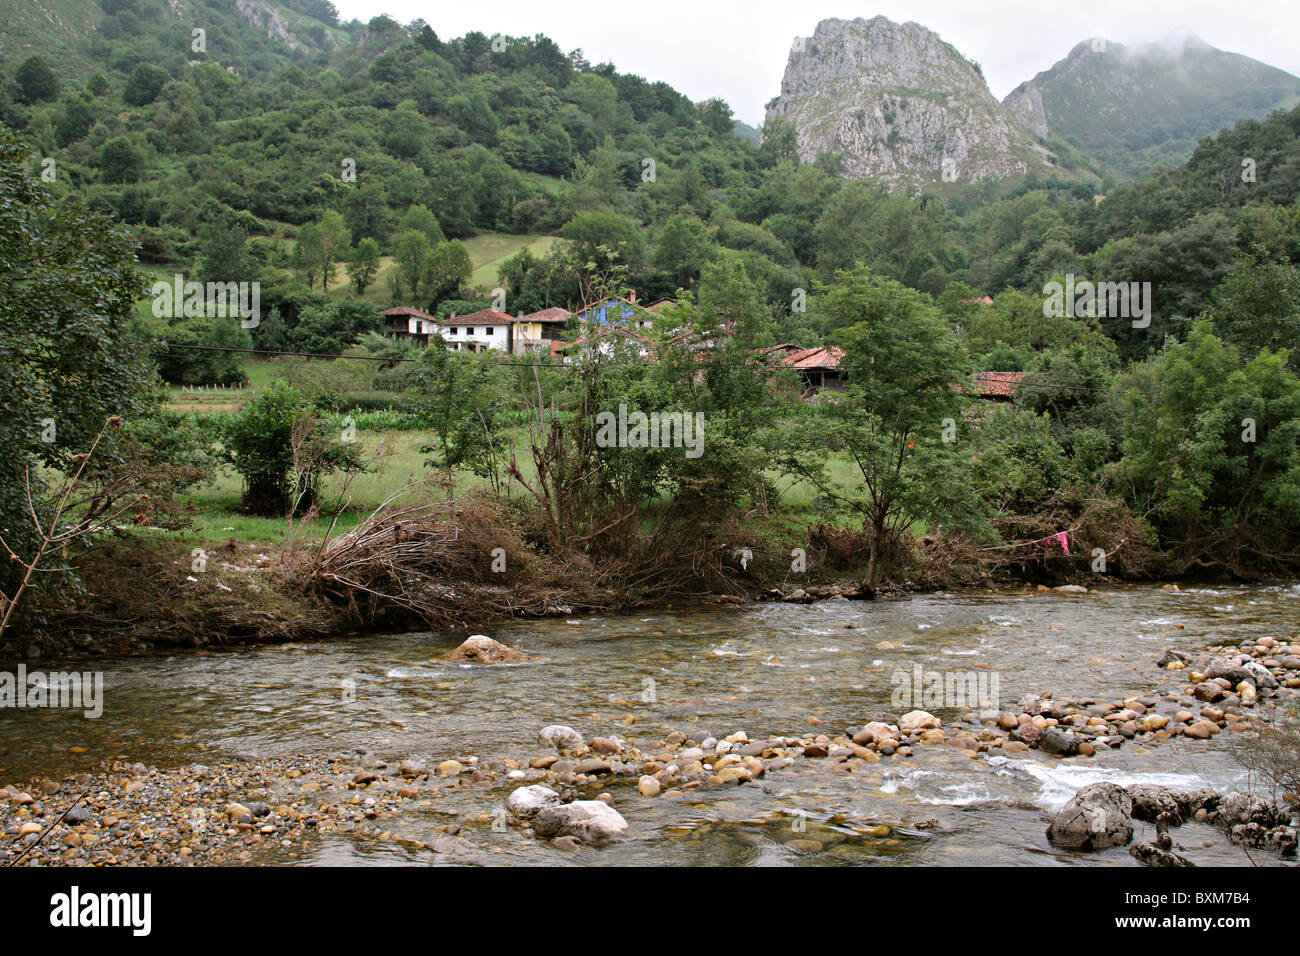 Flooding in Asturias on the Rio Sella - level of floods cleary visible from the flood debris along the river Stock Photo